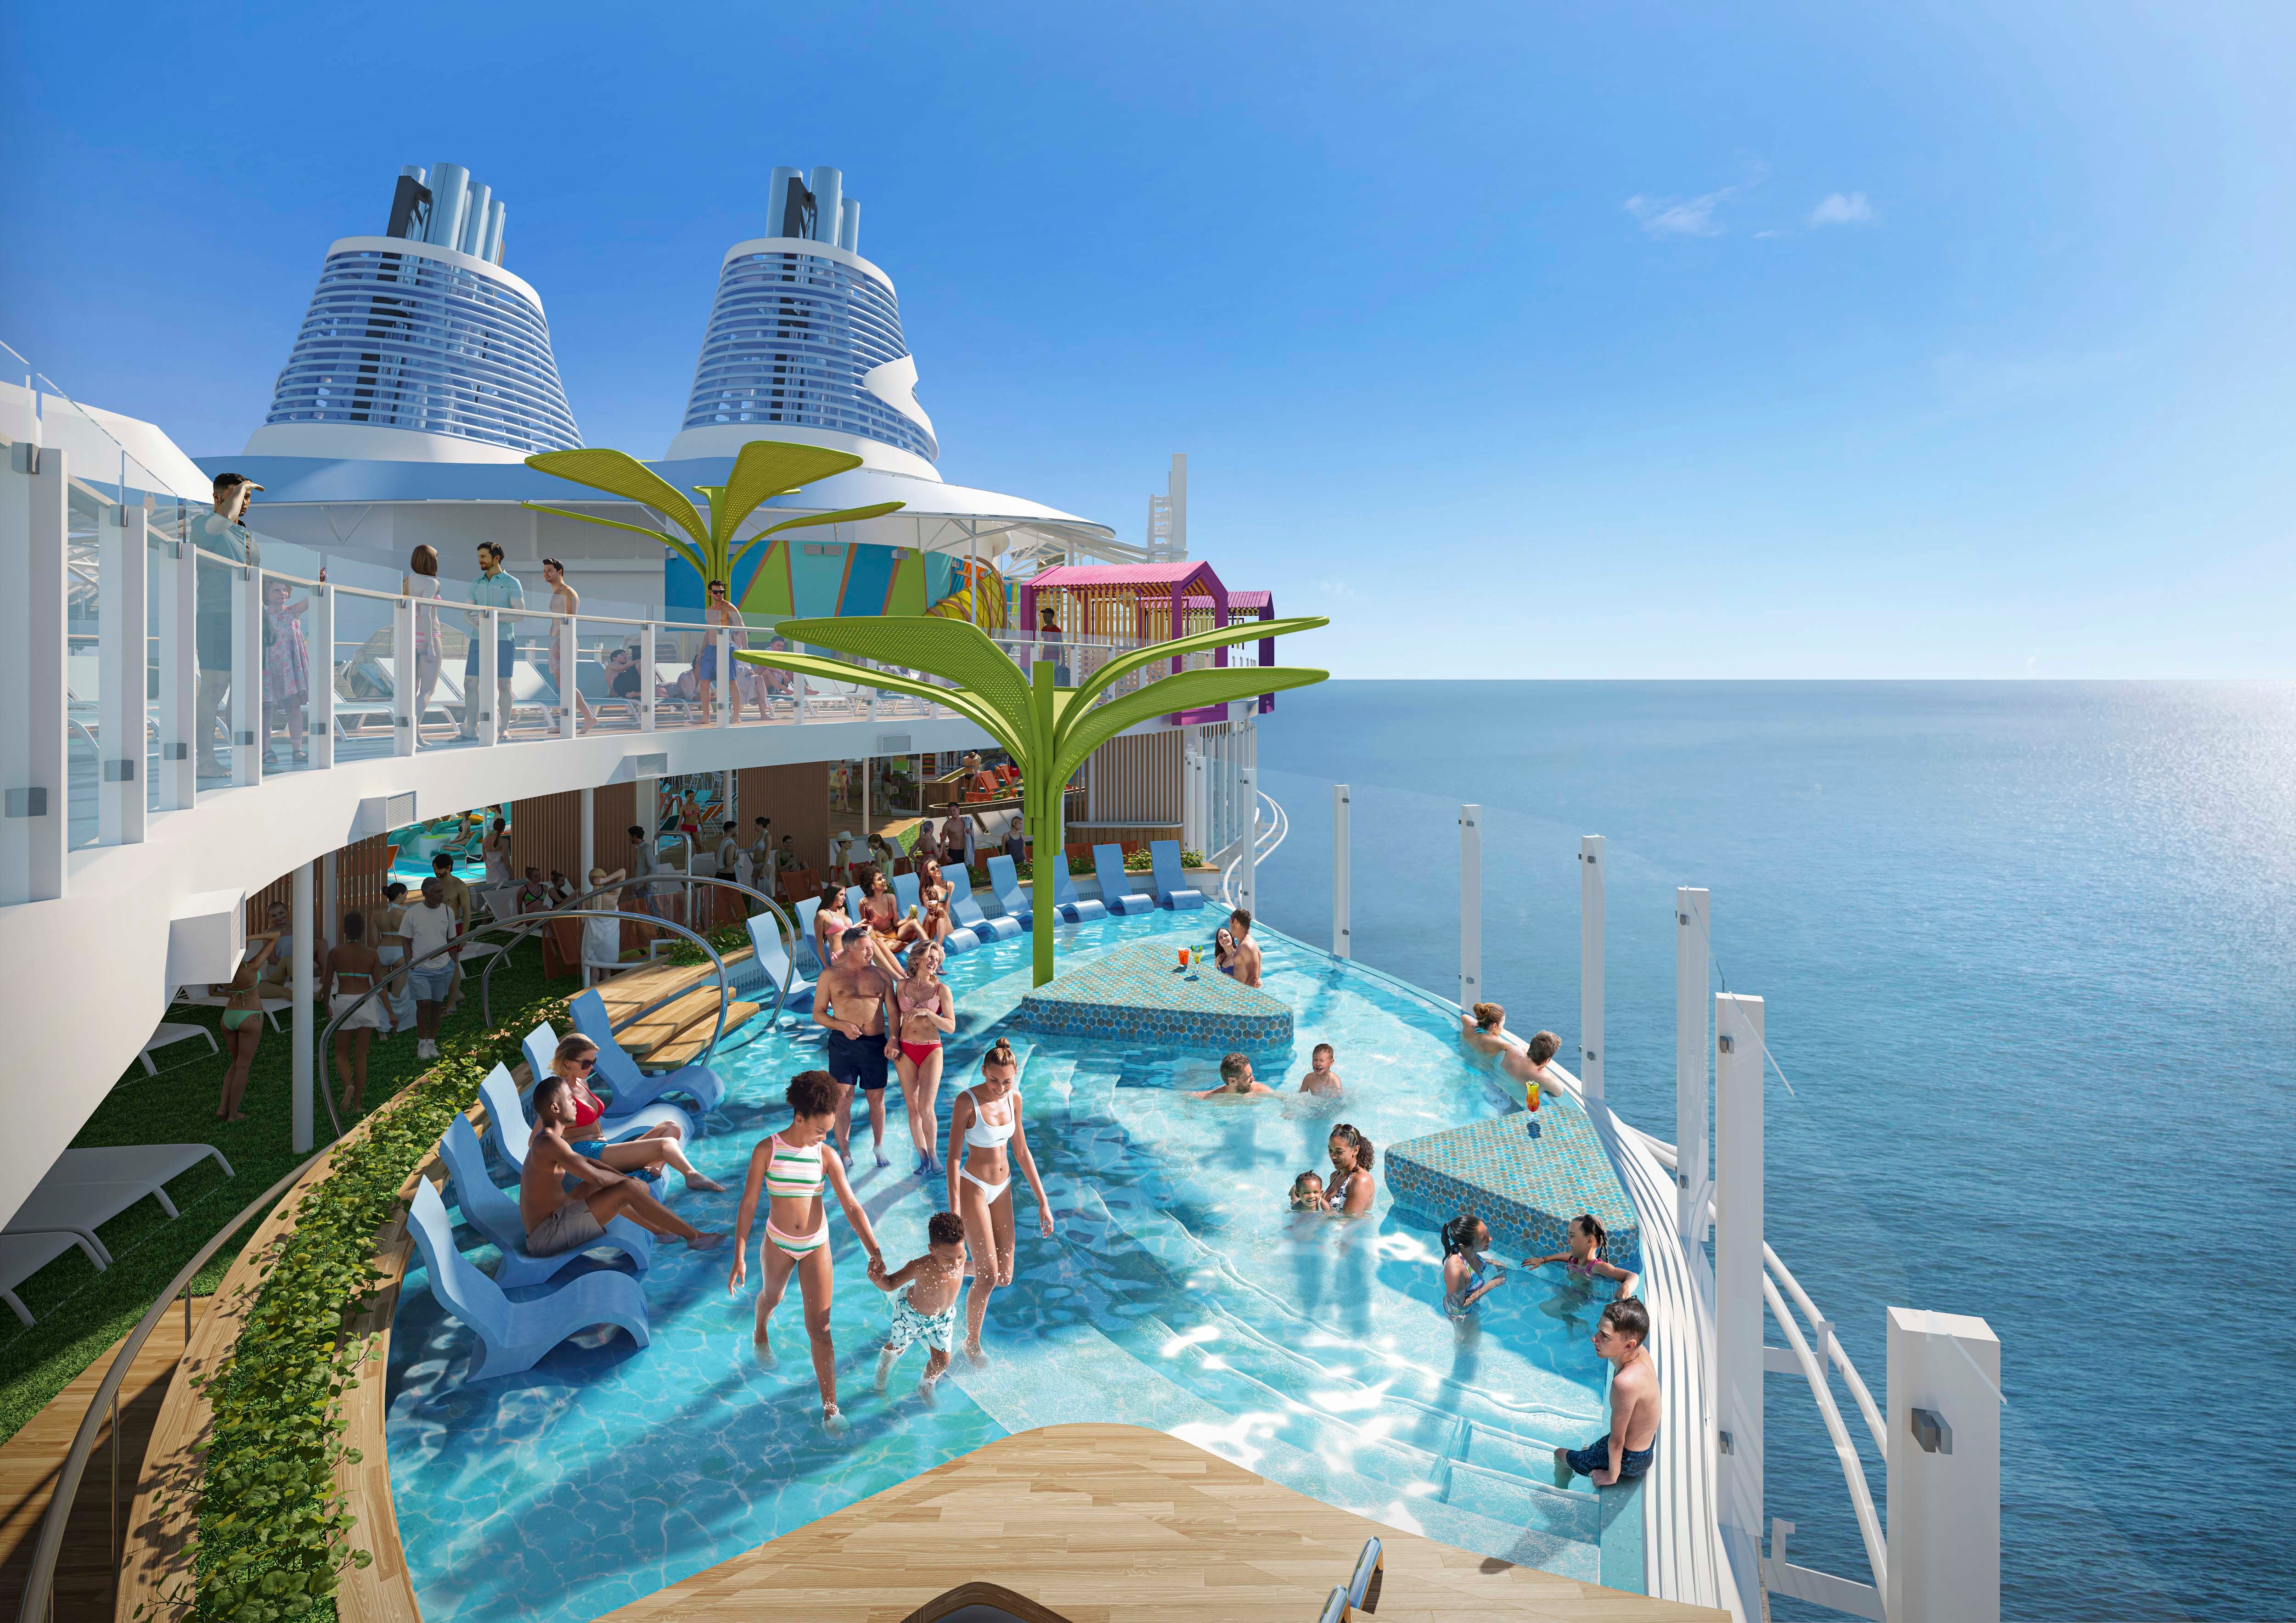 The ship will also hold the largest cruise ship water park